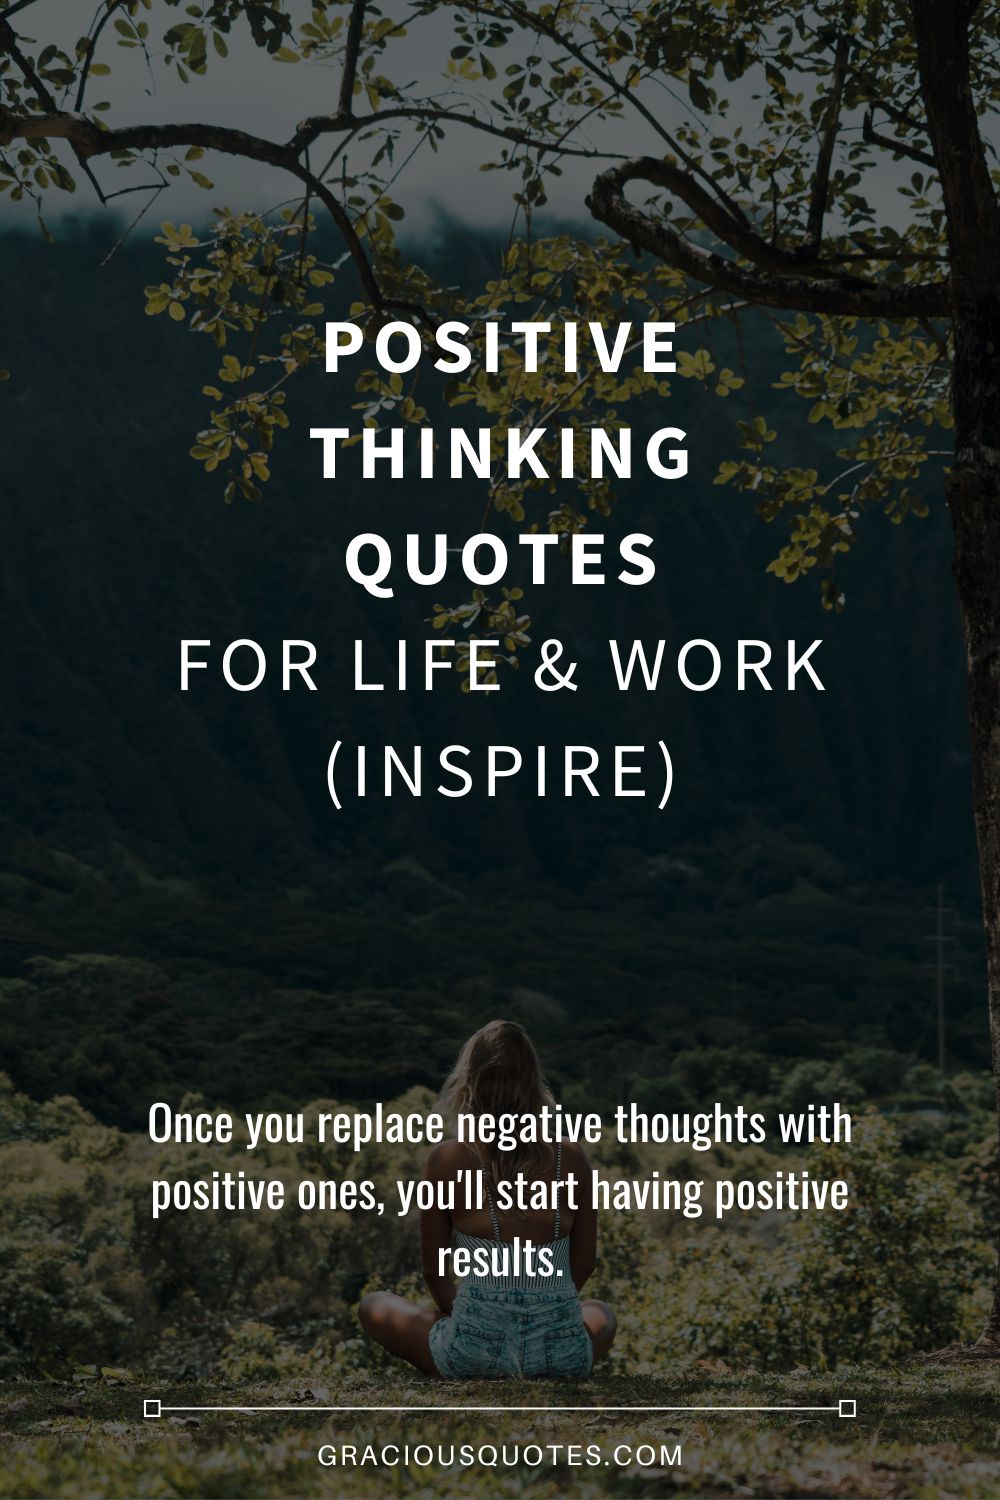 Positive Thinking Quotes for Life & Work (INSPIRE) - Gracious Quotes